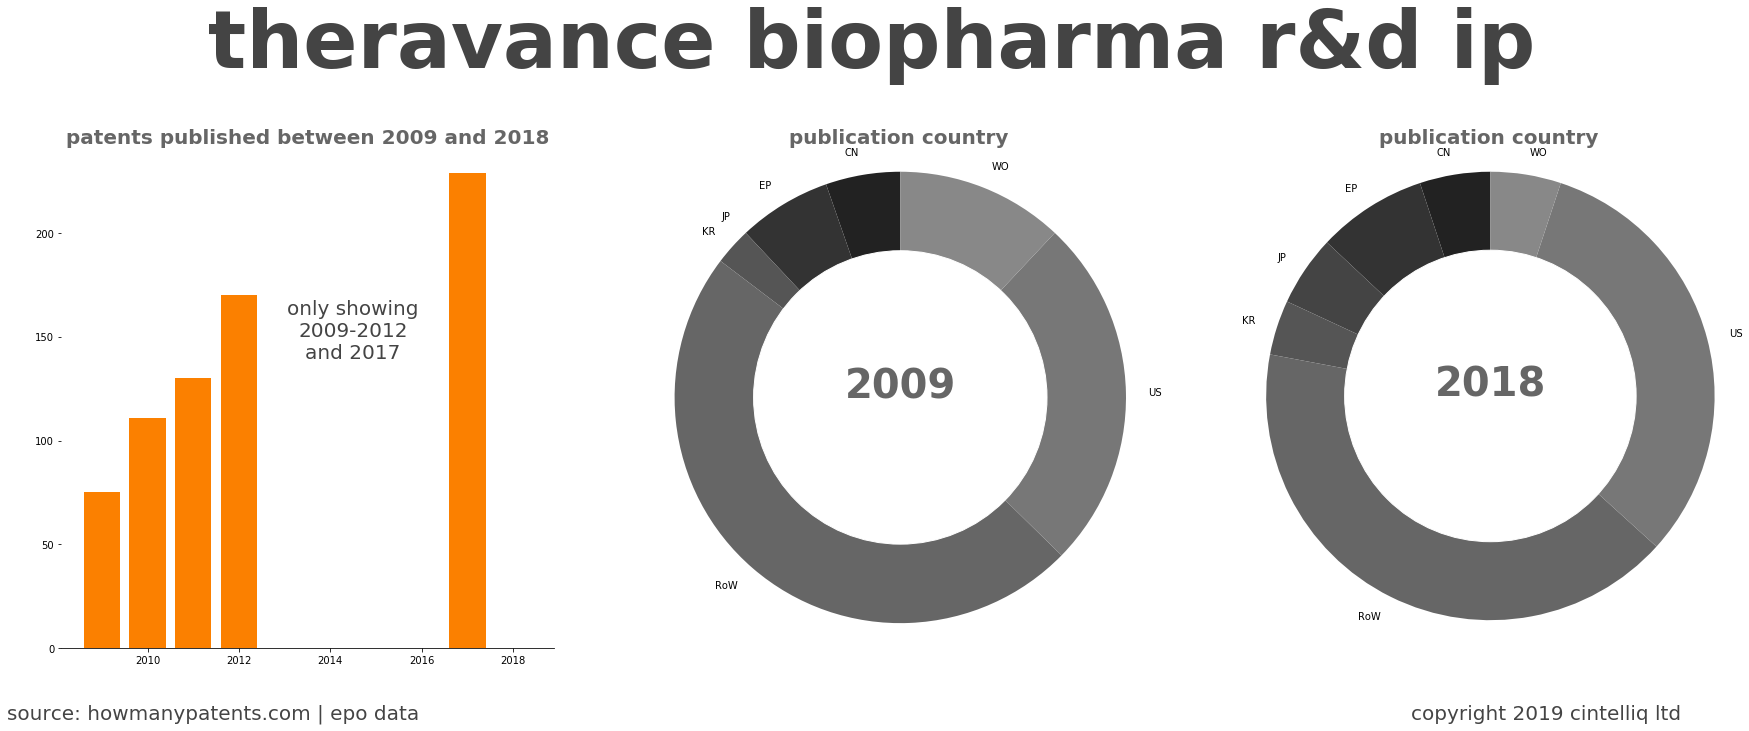 summary of patents for Theravance Biopharma R&D Ip